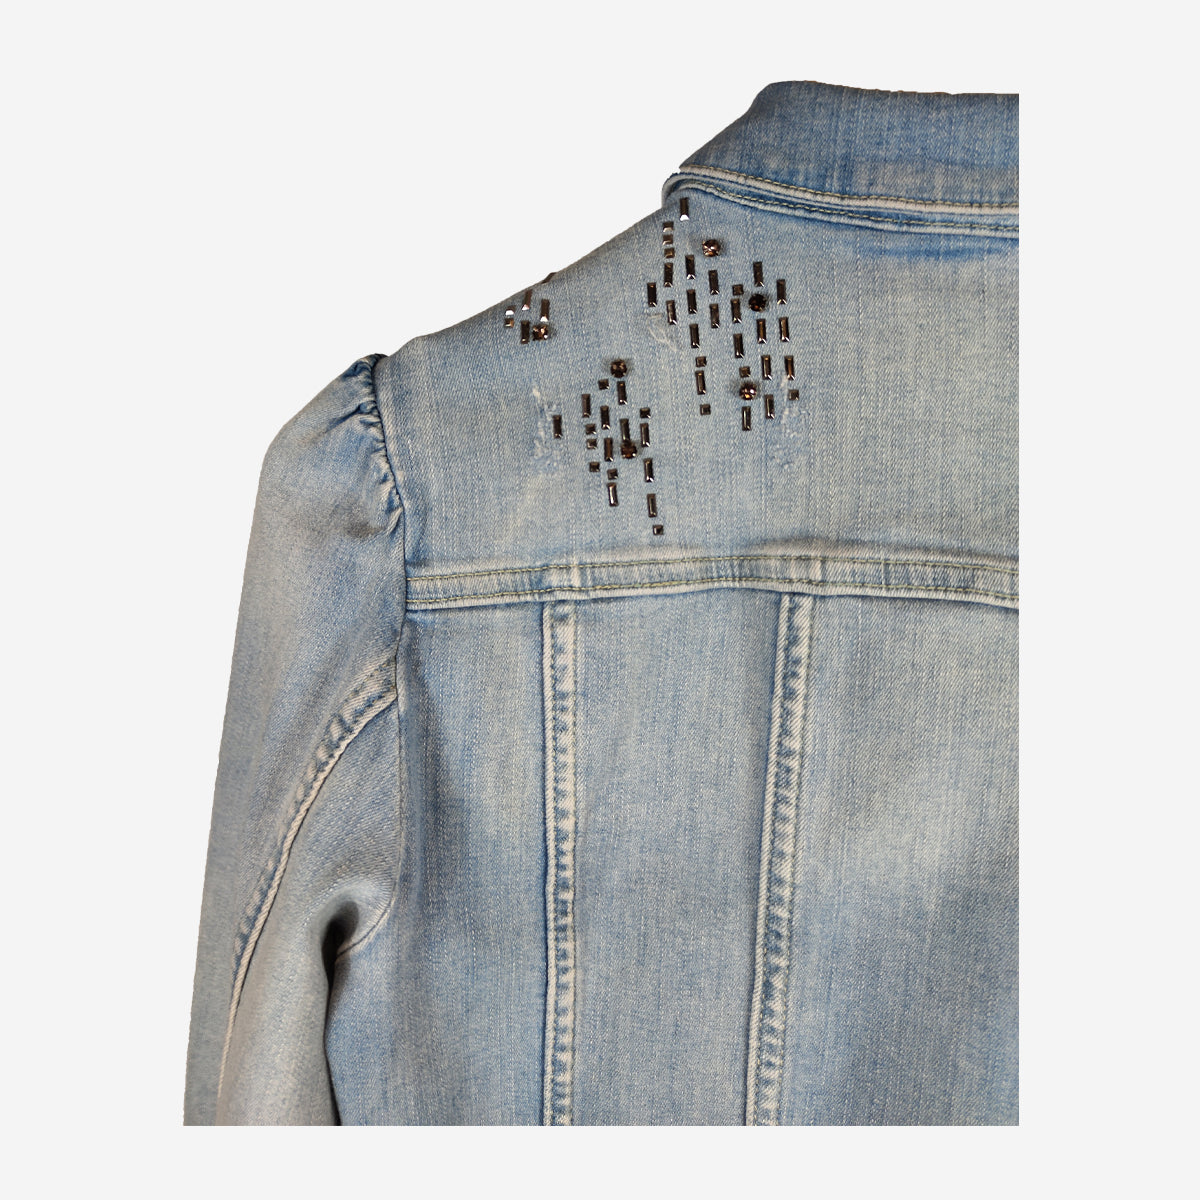 JEANS JACKET WITH GEMSTONES IN LIGHT BLUE